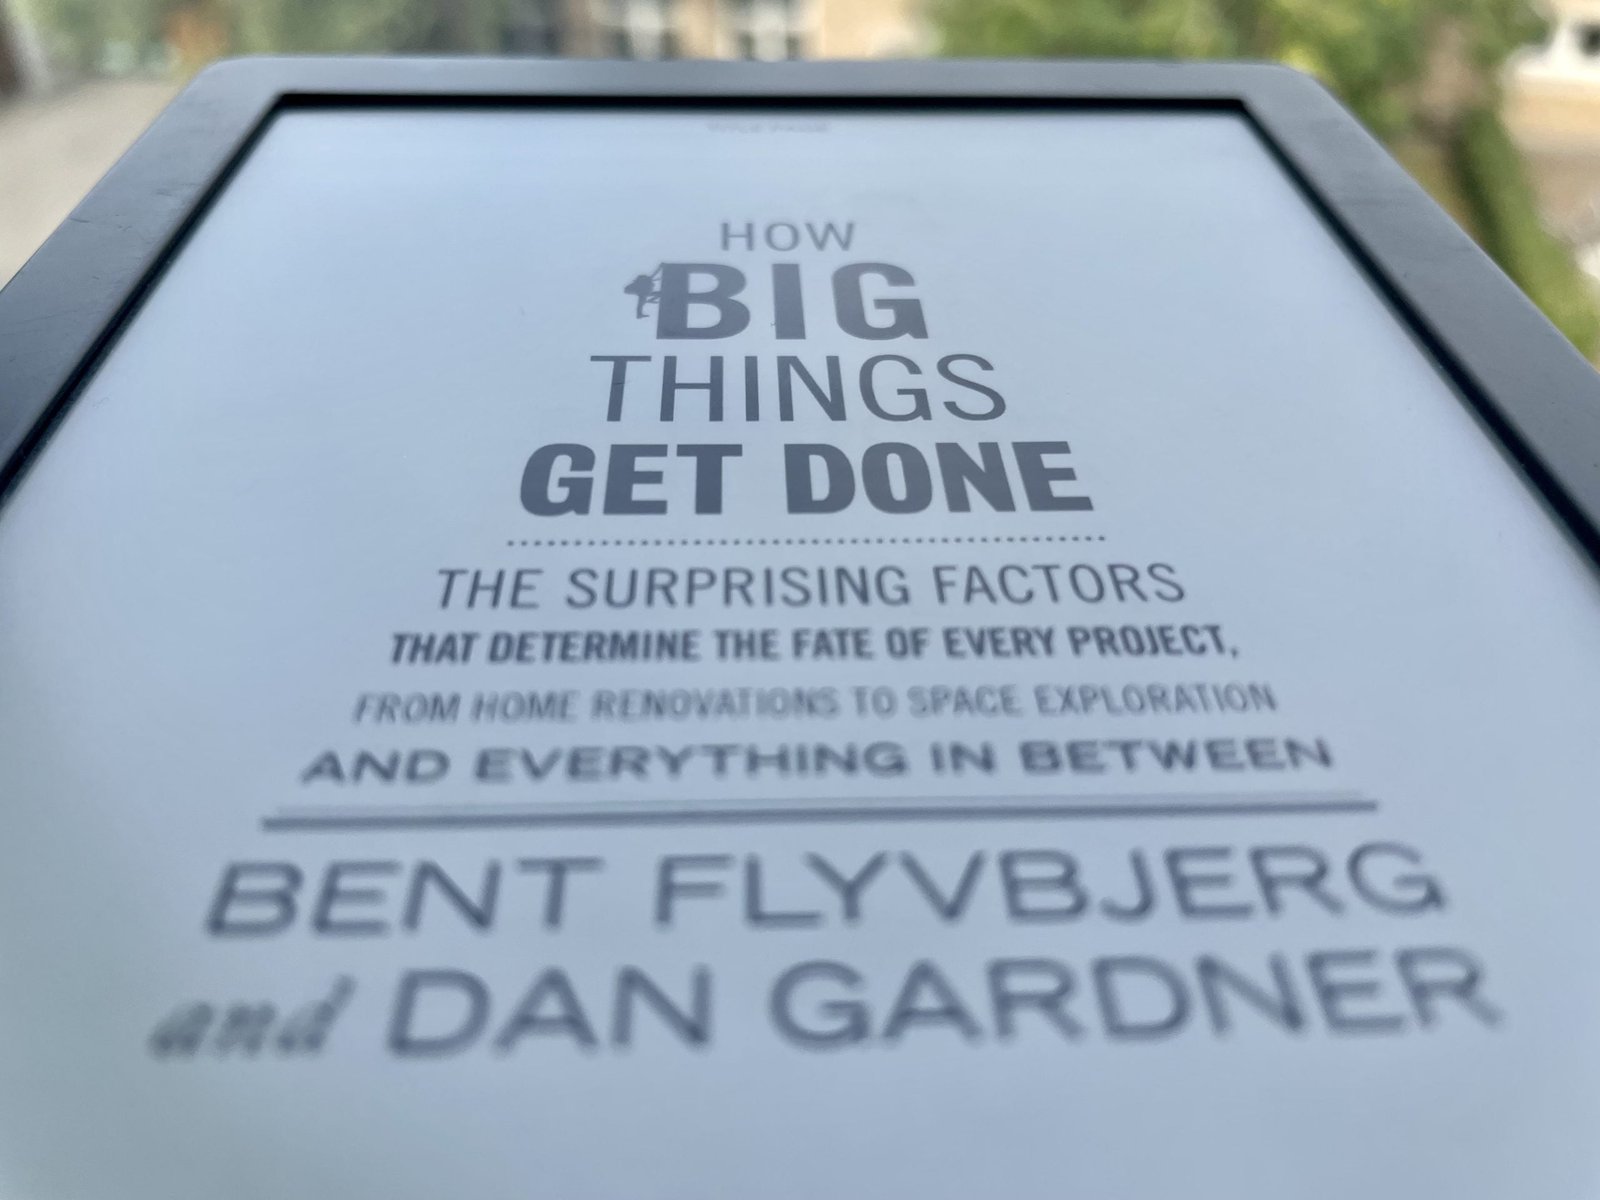 How to get big things done, Bent Flyvbjerg and Dan Gardner